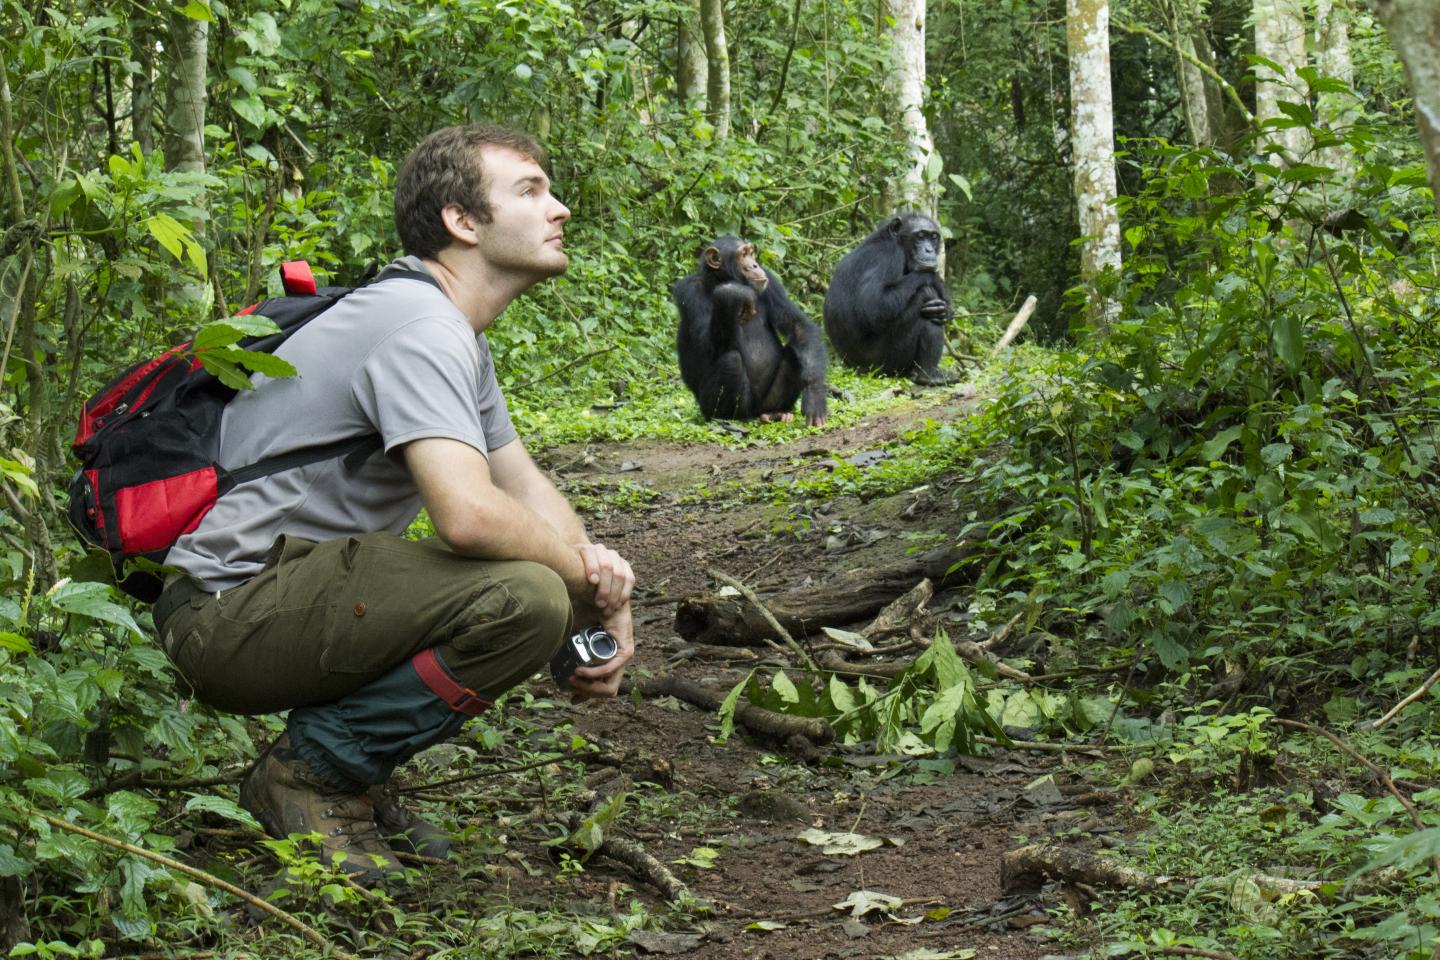 Dr. Gruber with Wild Chimps